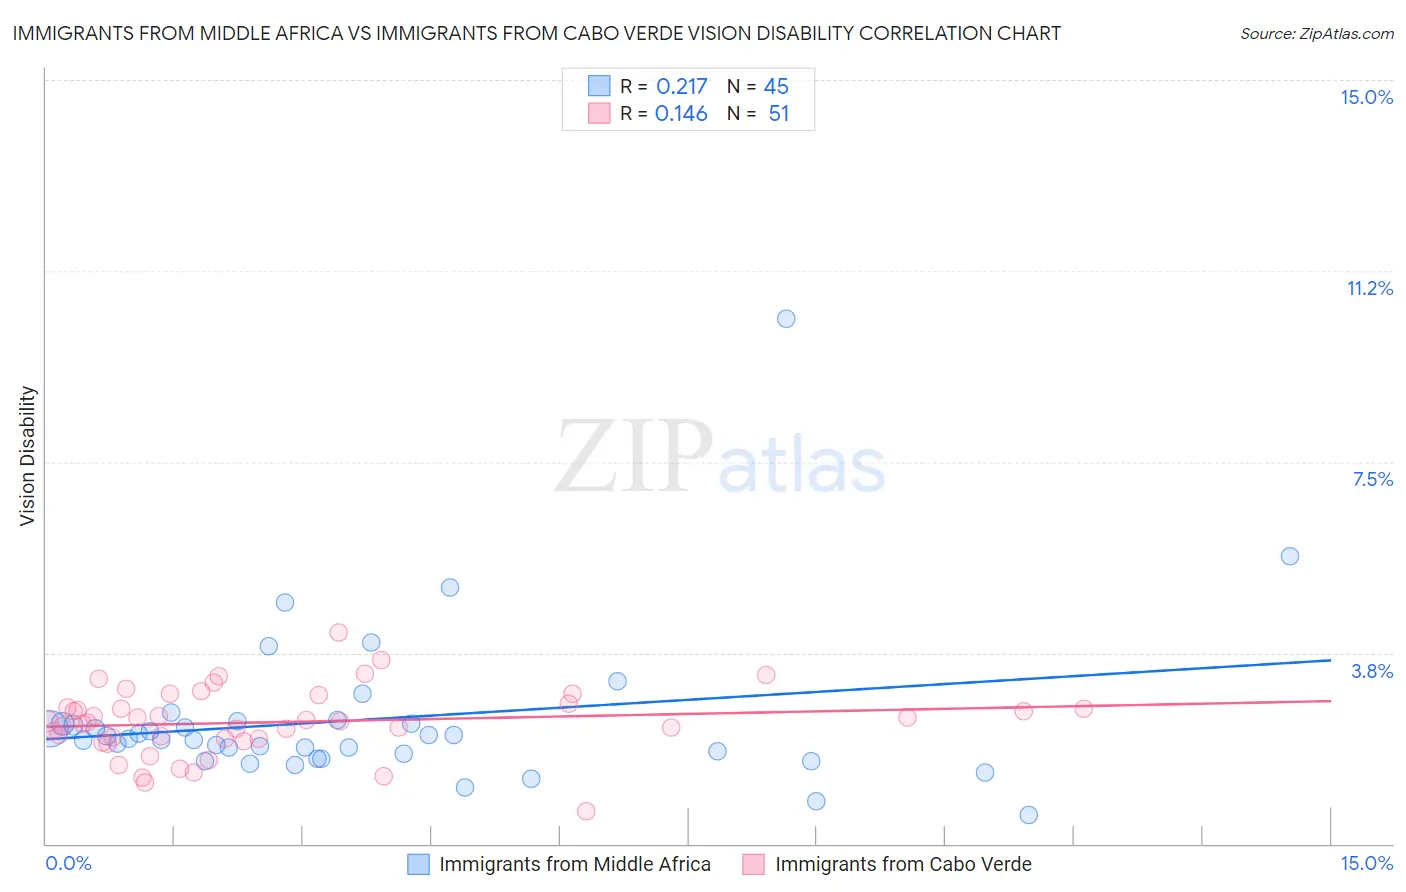 Immigrants from Middle Africa vs Immigrants from Cabo Verde Vision Disability